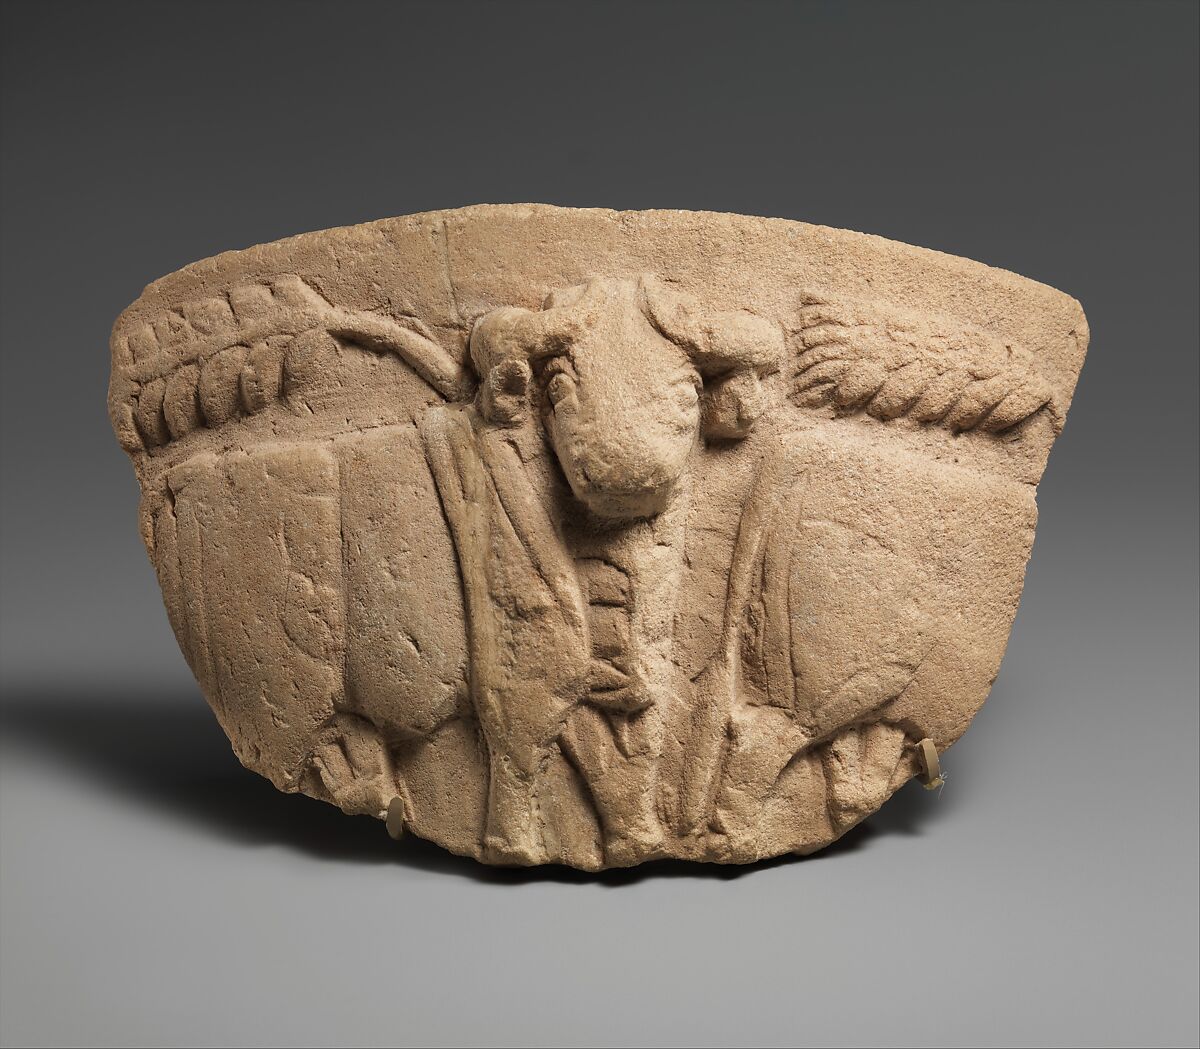 Fragment of a vessel with wheat stalks and a procession of bulls in relief, Limestone 